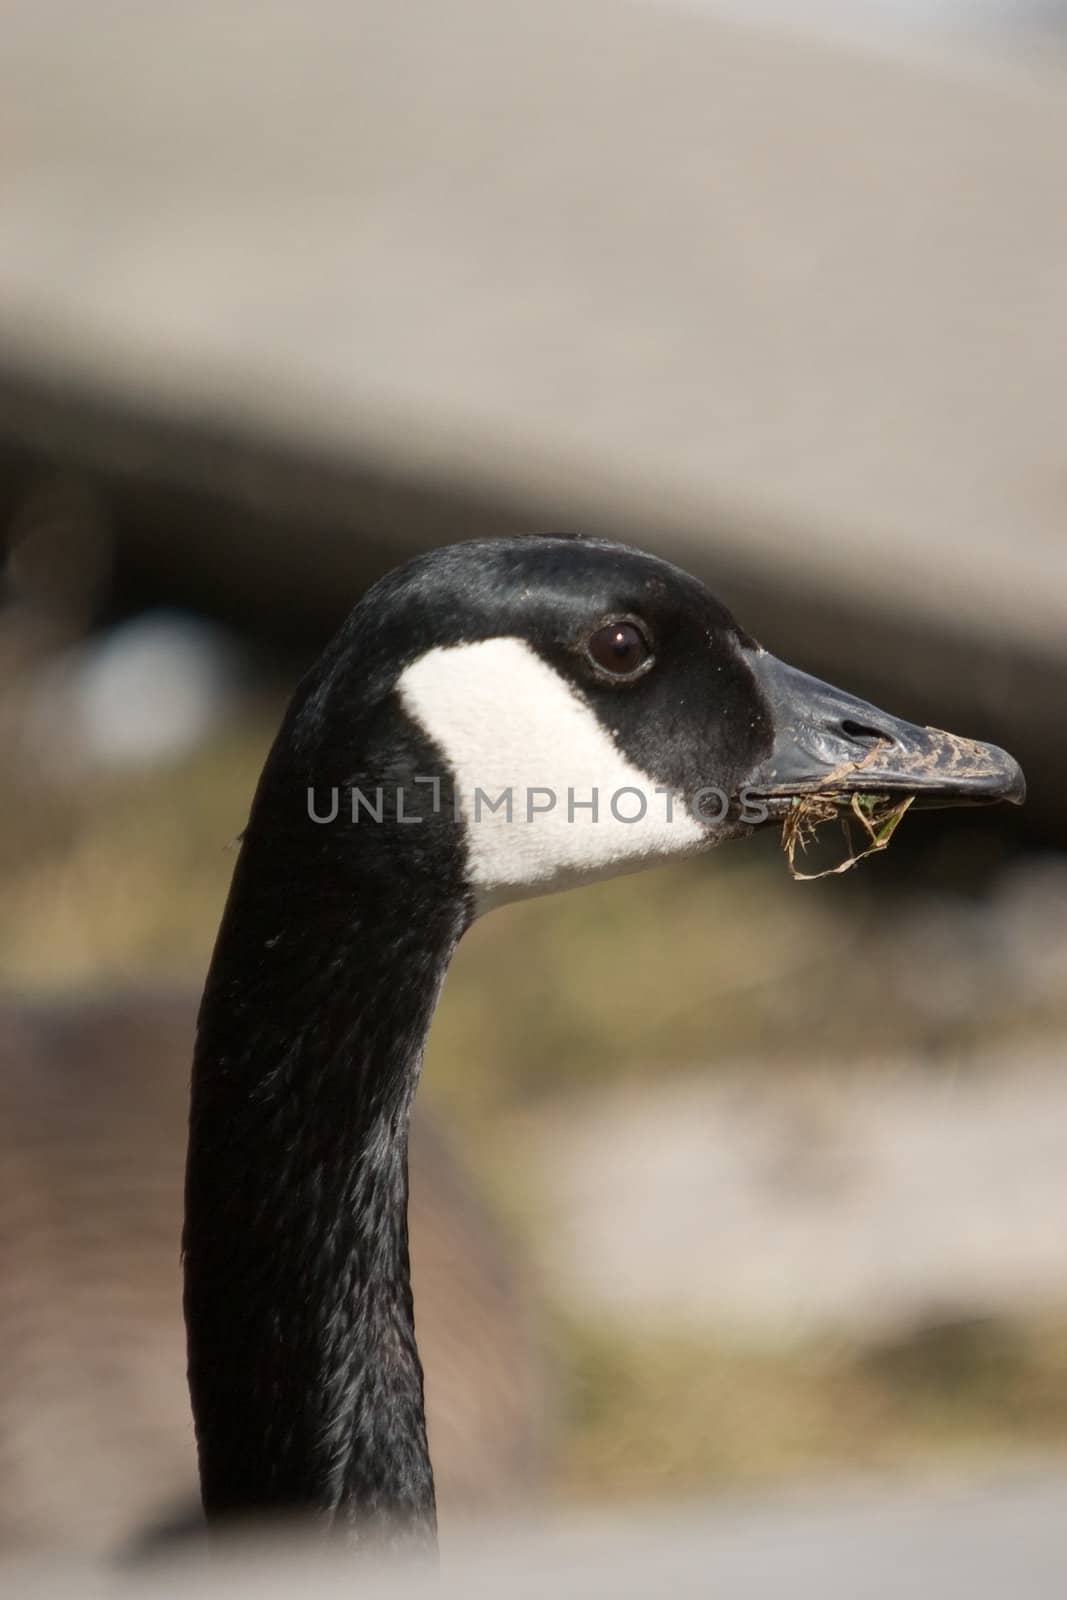 Closeup of the head and neck of a Canada goose.